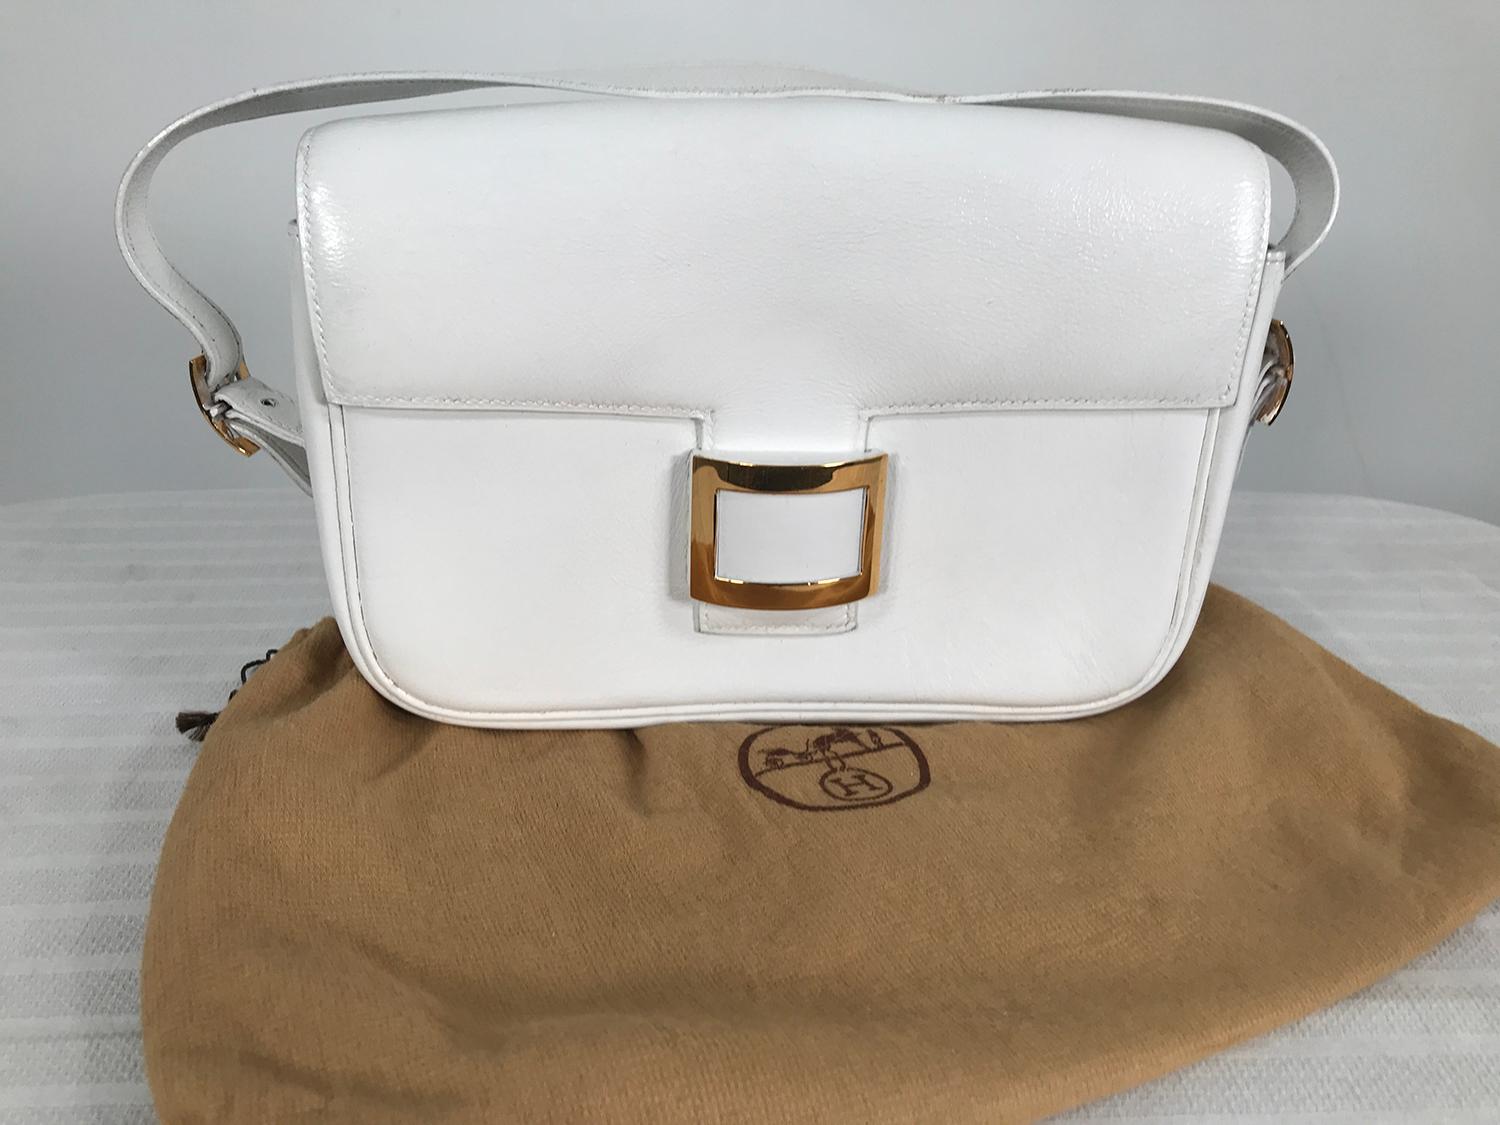 Vintage Hermes white flap front bag with gold buckle front and center front tab closure. Short handle or strap, with gold buckles at either bag side. From the 1980s M in a circle date code stamped on the leather zipper pull tab inside the bag. The